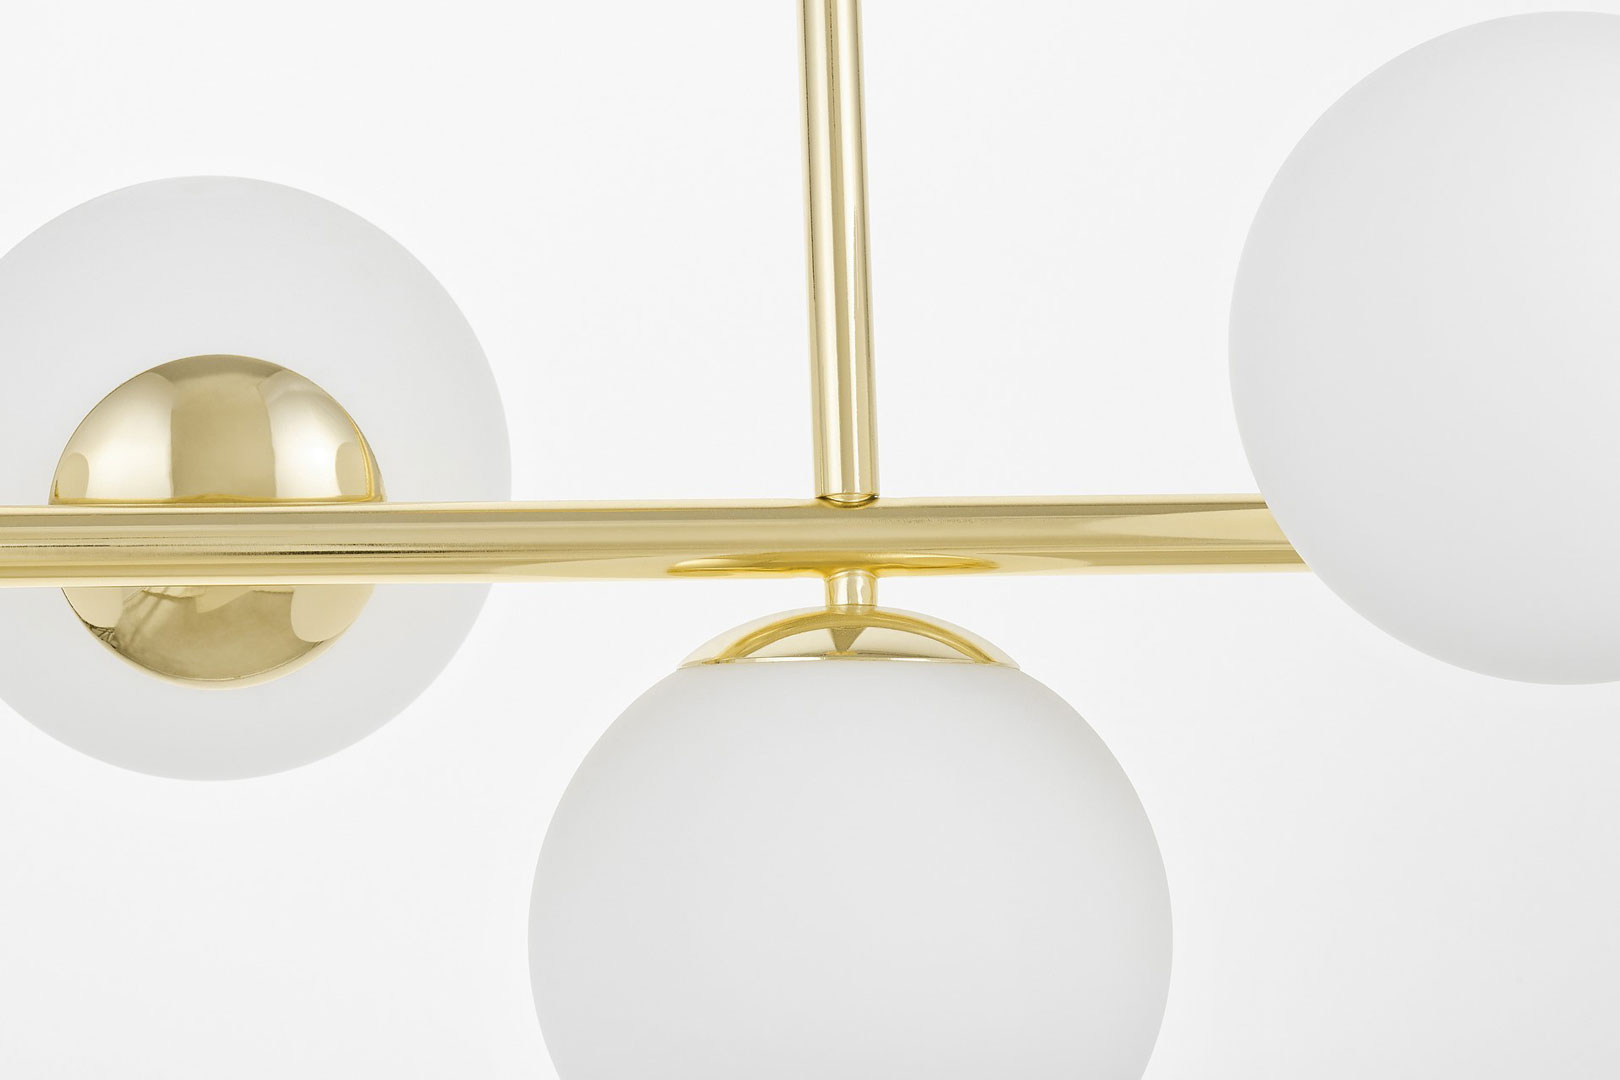 Gold chandelier, glass white balls, pendant lamp with shades on a horizontal bar, classic gold - FREDICA W7 - Lumina Deco image 4